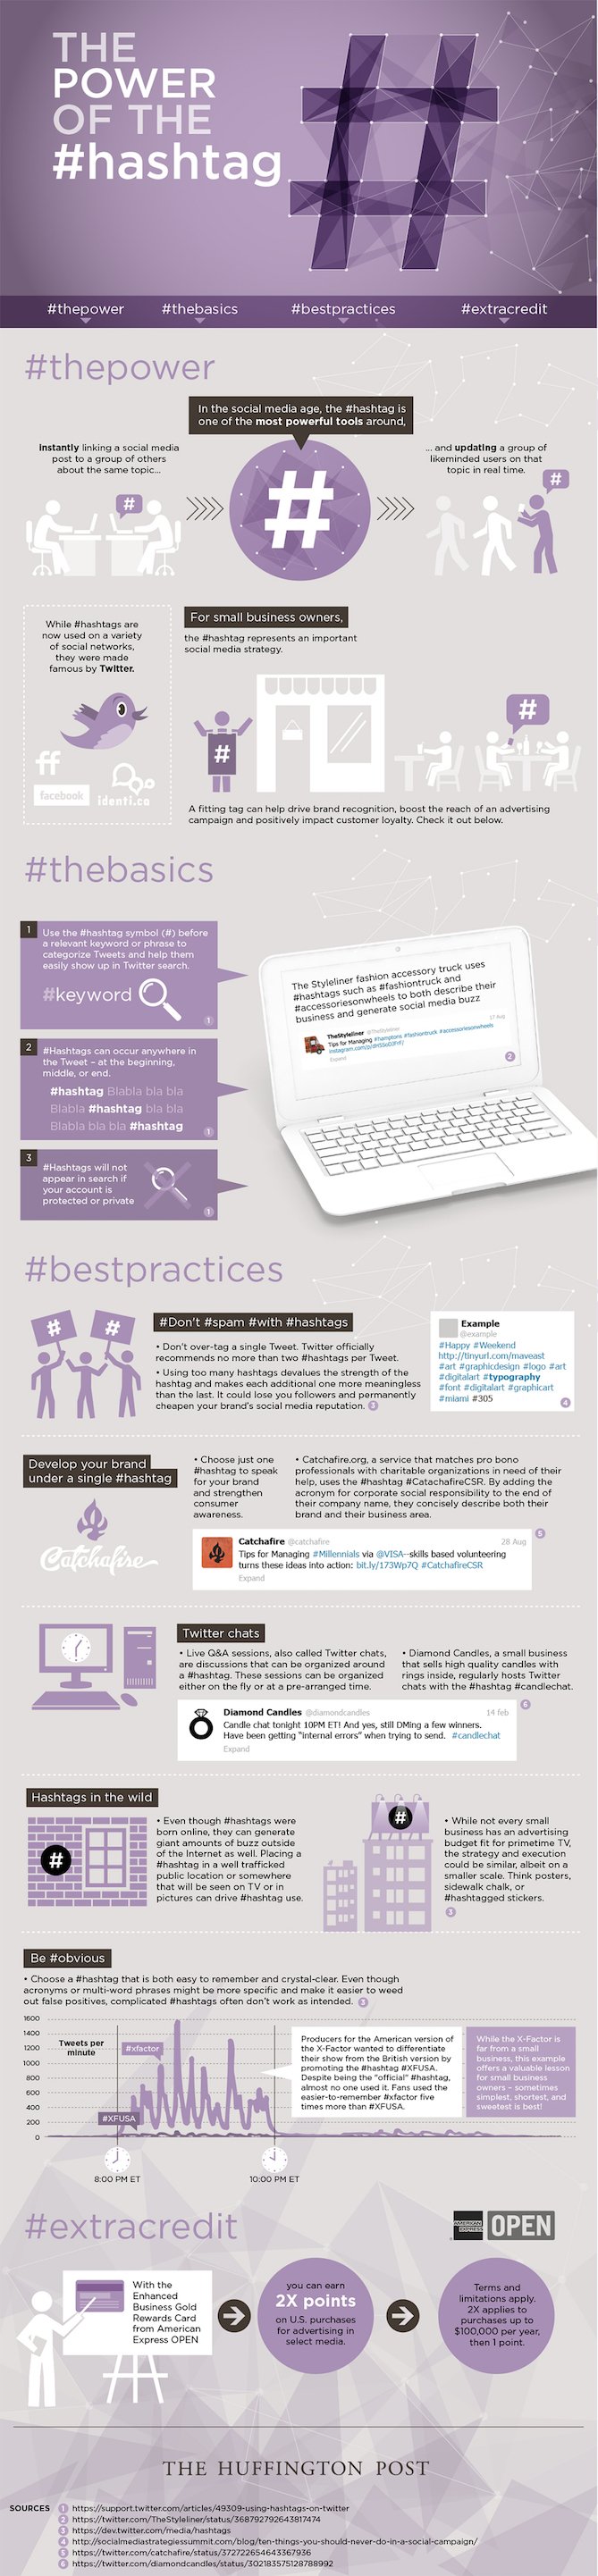 power-of-hashtag-infographic